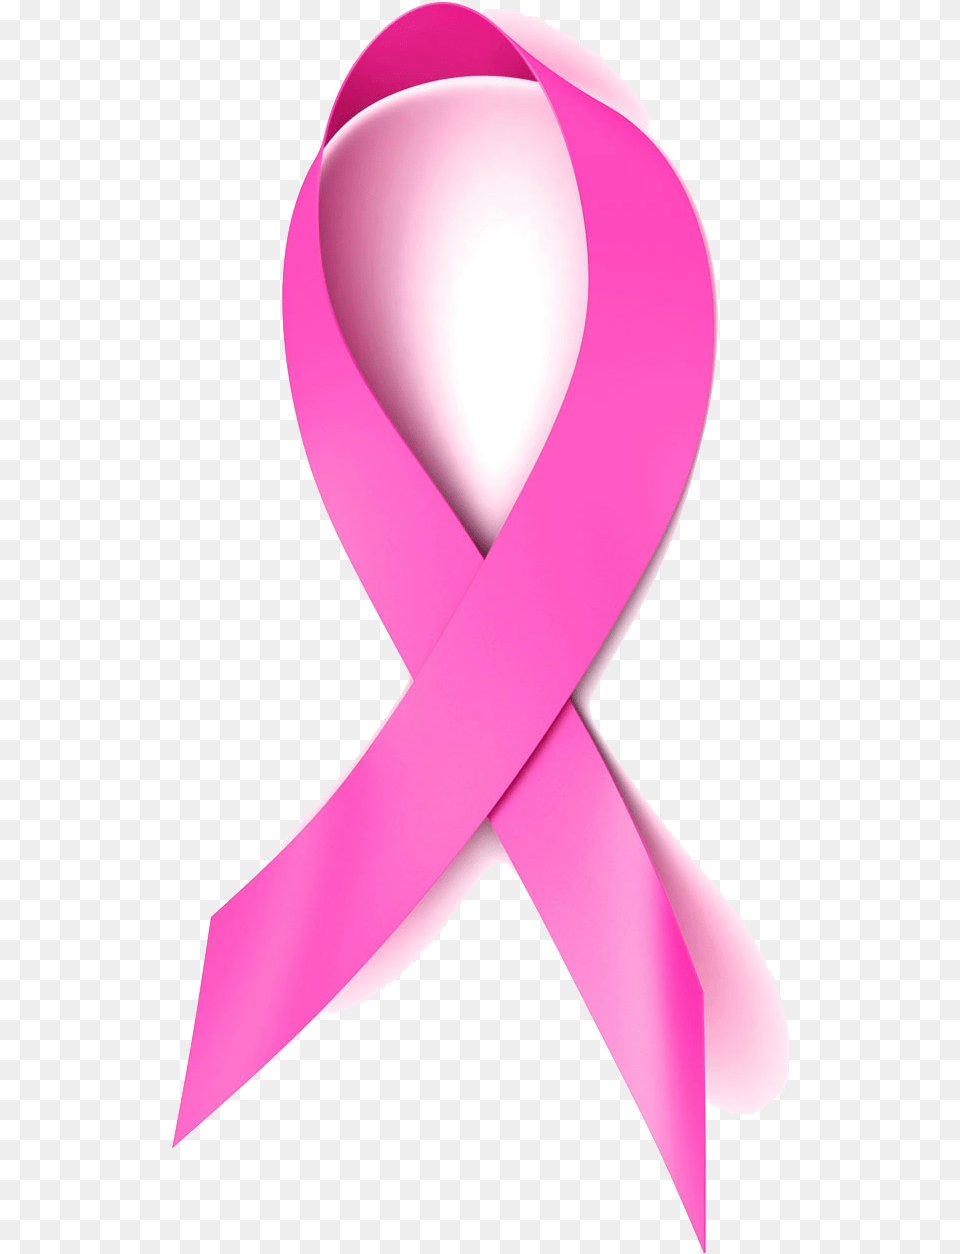 Breast Cancer Ribbon Transparent Images All Transparent Background Breast Cancer Ribbon, Accessories, Formal Wear, Tie Free Png Download